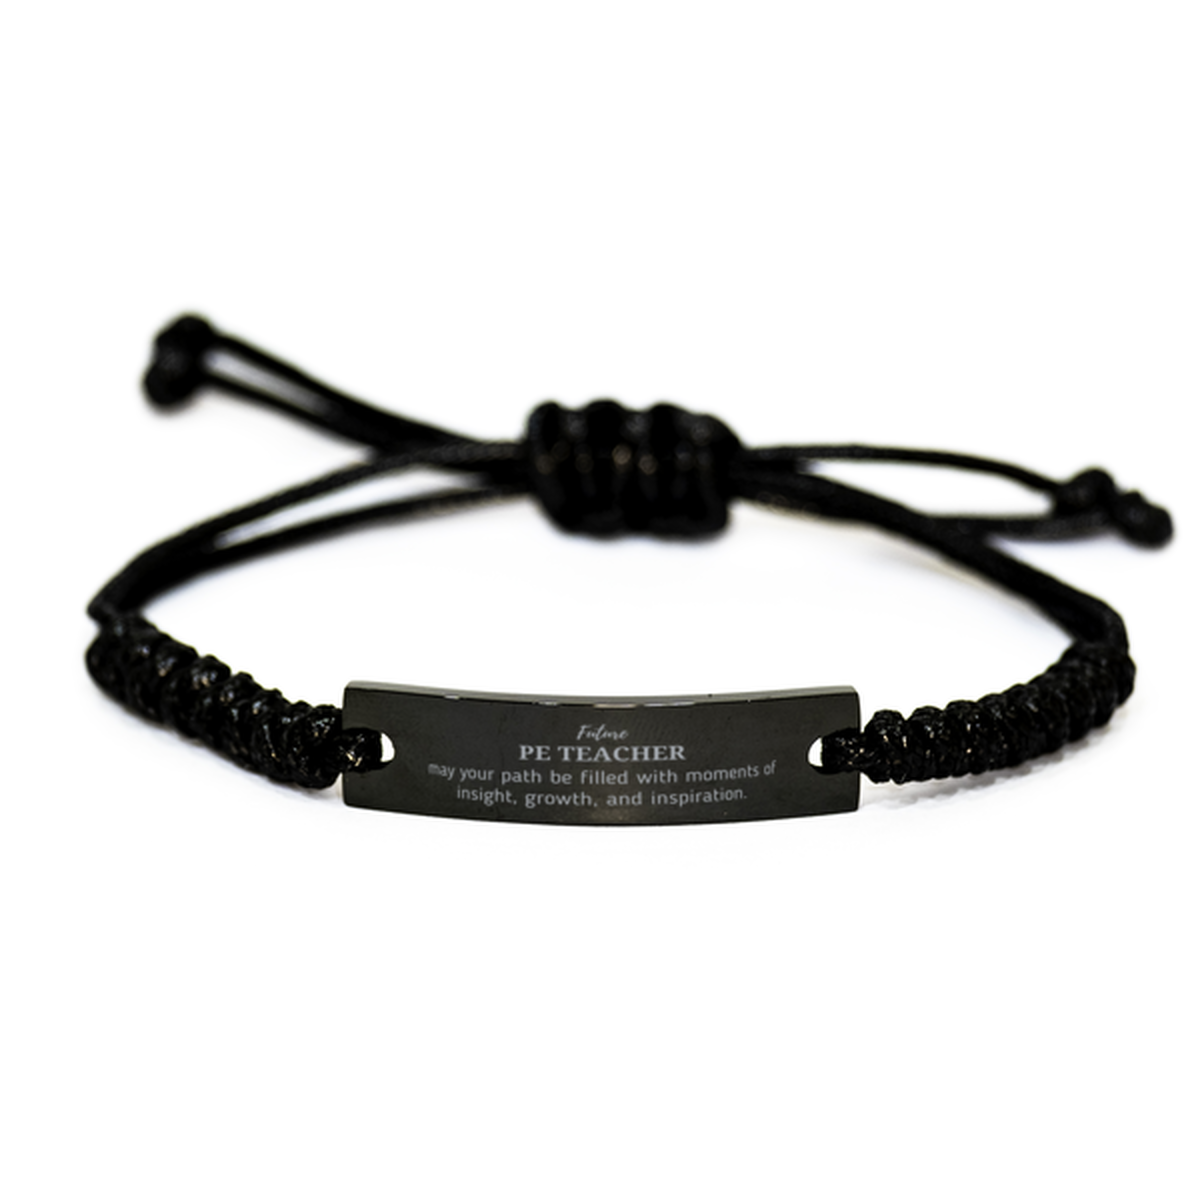 Future PE Teacher Gifts, May your path be filled with moments of insight, Graduation Gifts for New PE Teacher, Christmas Unique Black Rope Bracelet For Men, Women, Friends